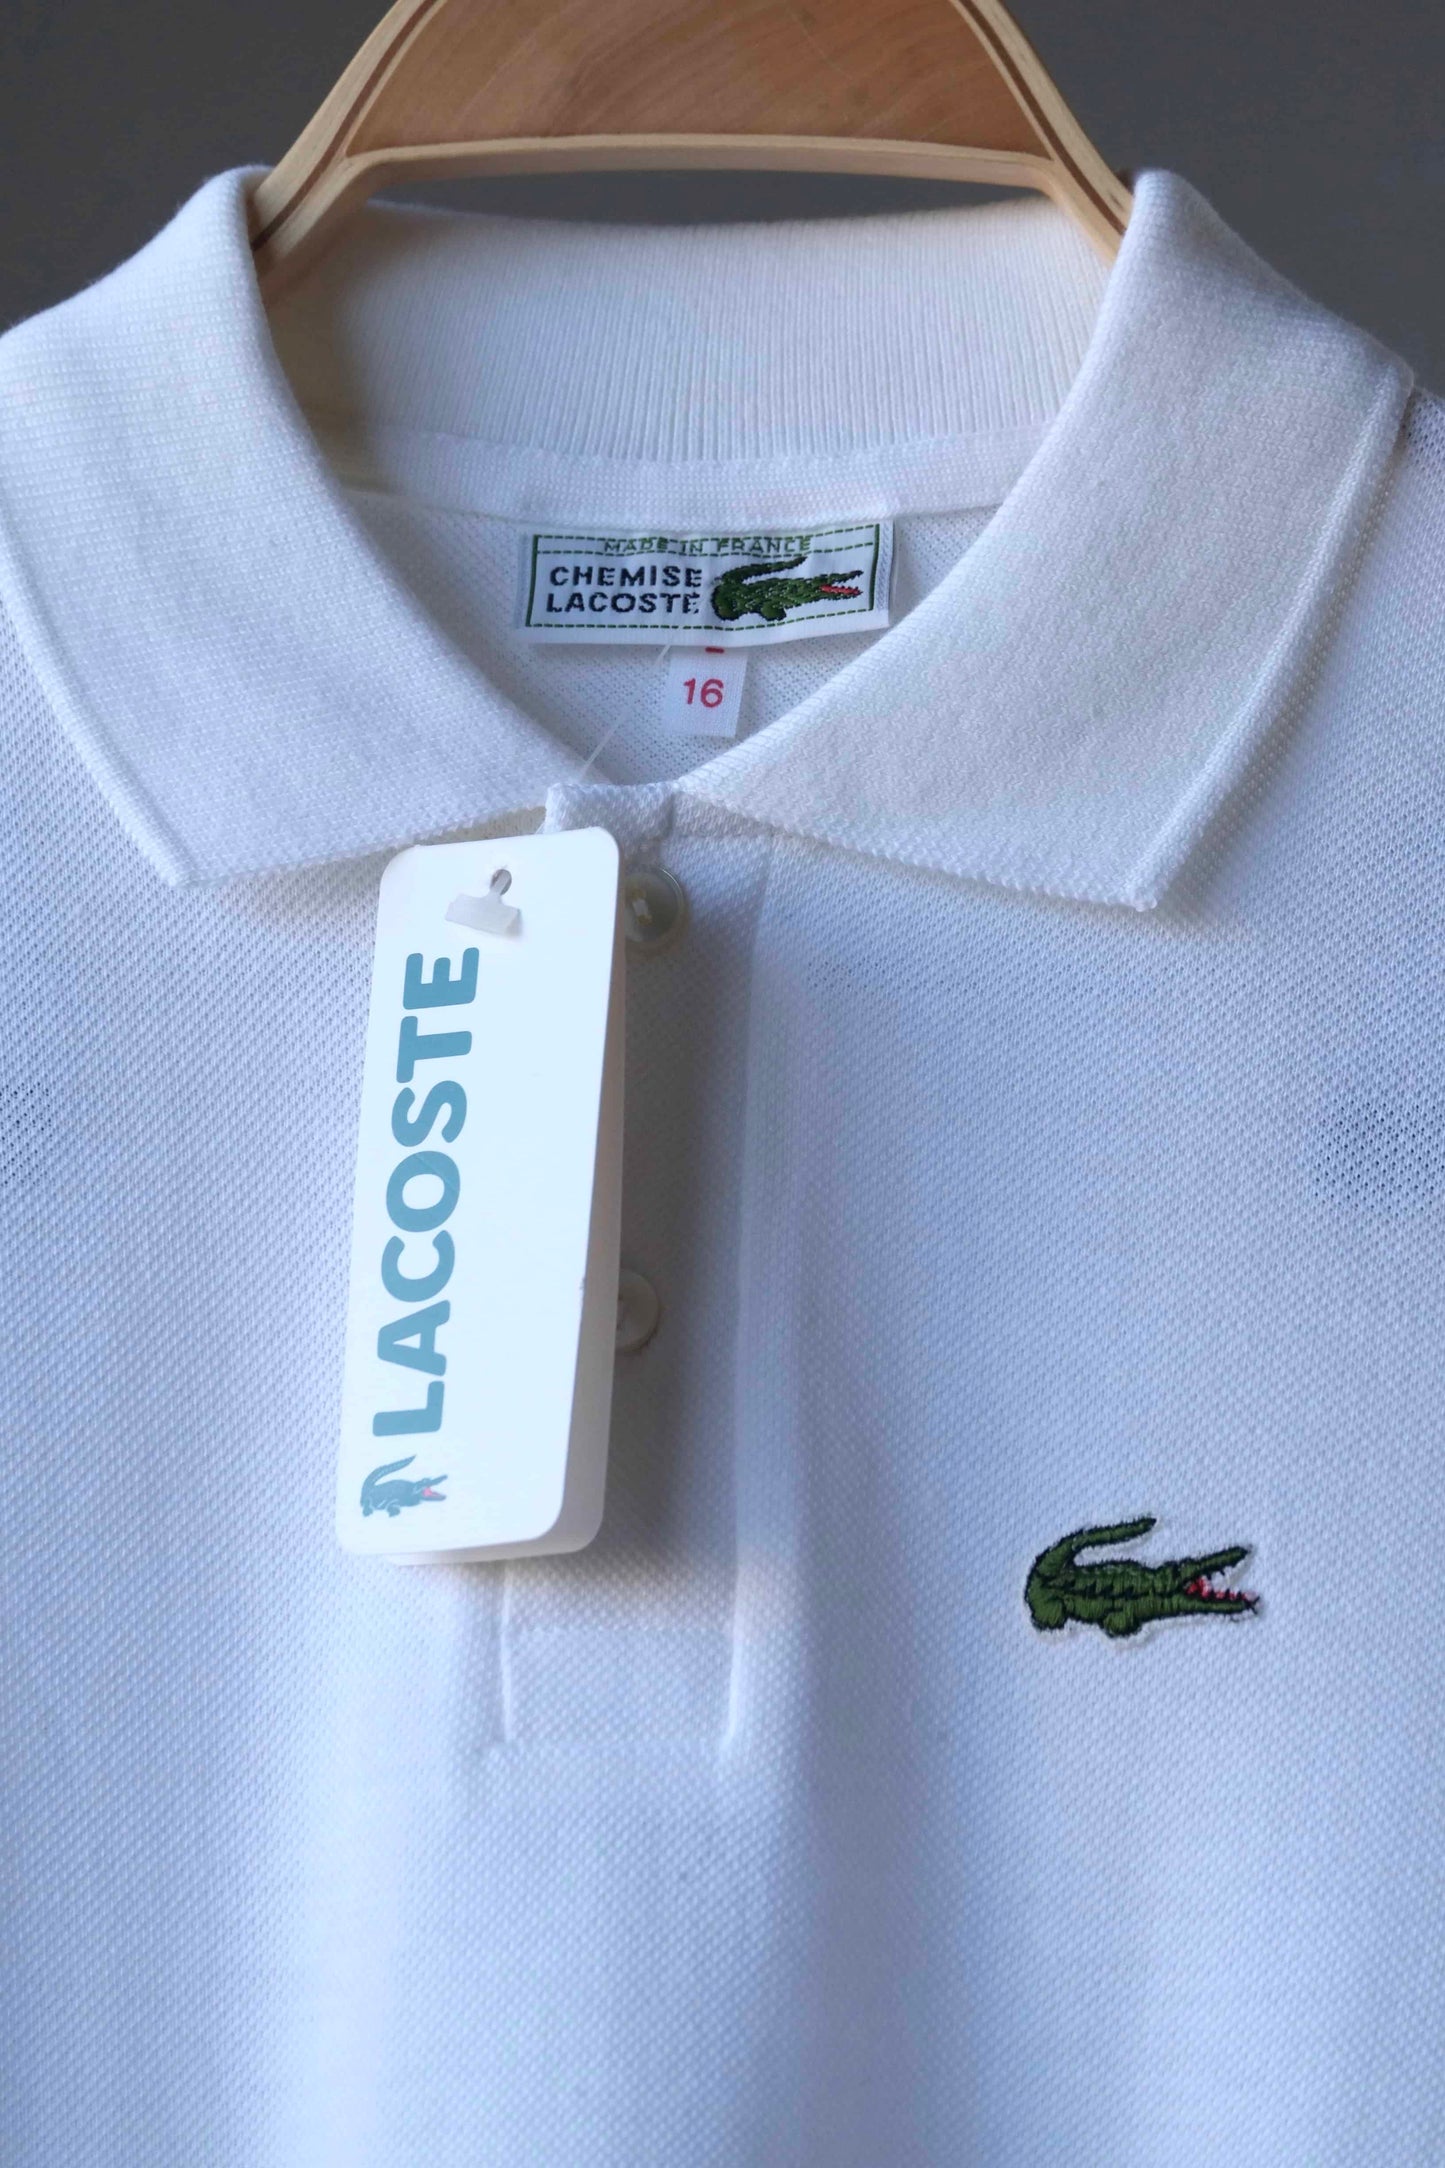 LACOSTE Vintage Polo white color close up of label and tag